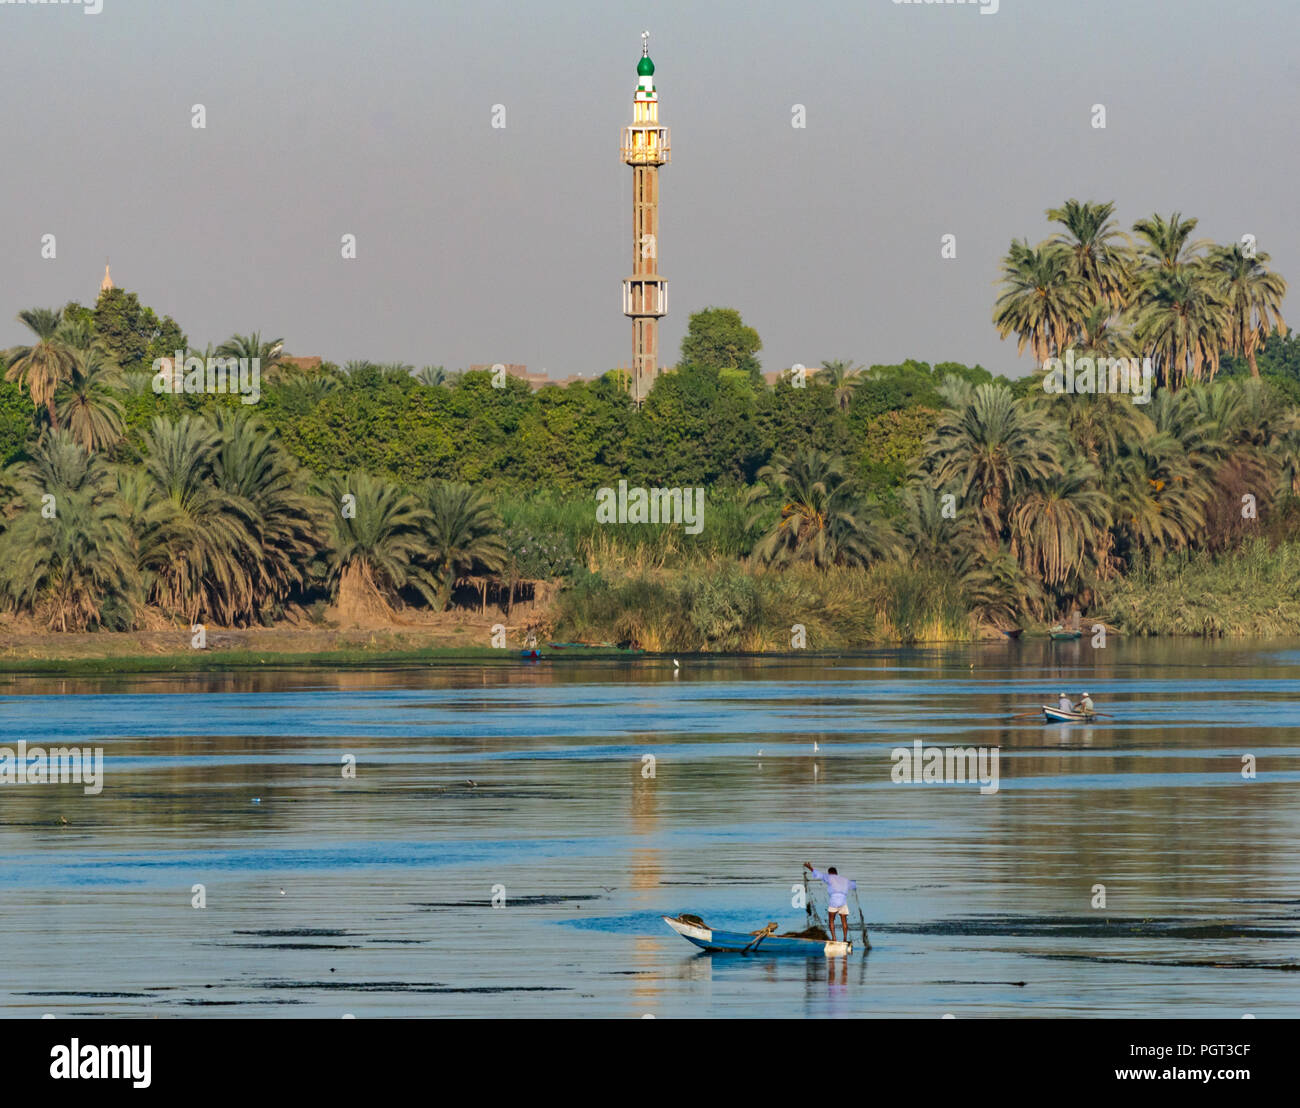 Egyptian local man in old rowing boat fishing with net in early morning sunlight, with tall mosque minaret, Nile River, Egypt, Africa Stock Photo